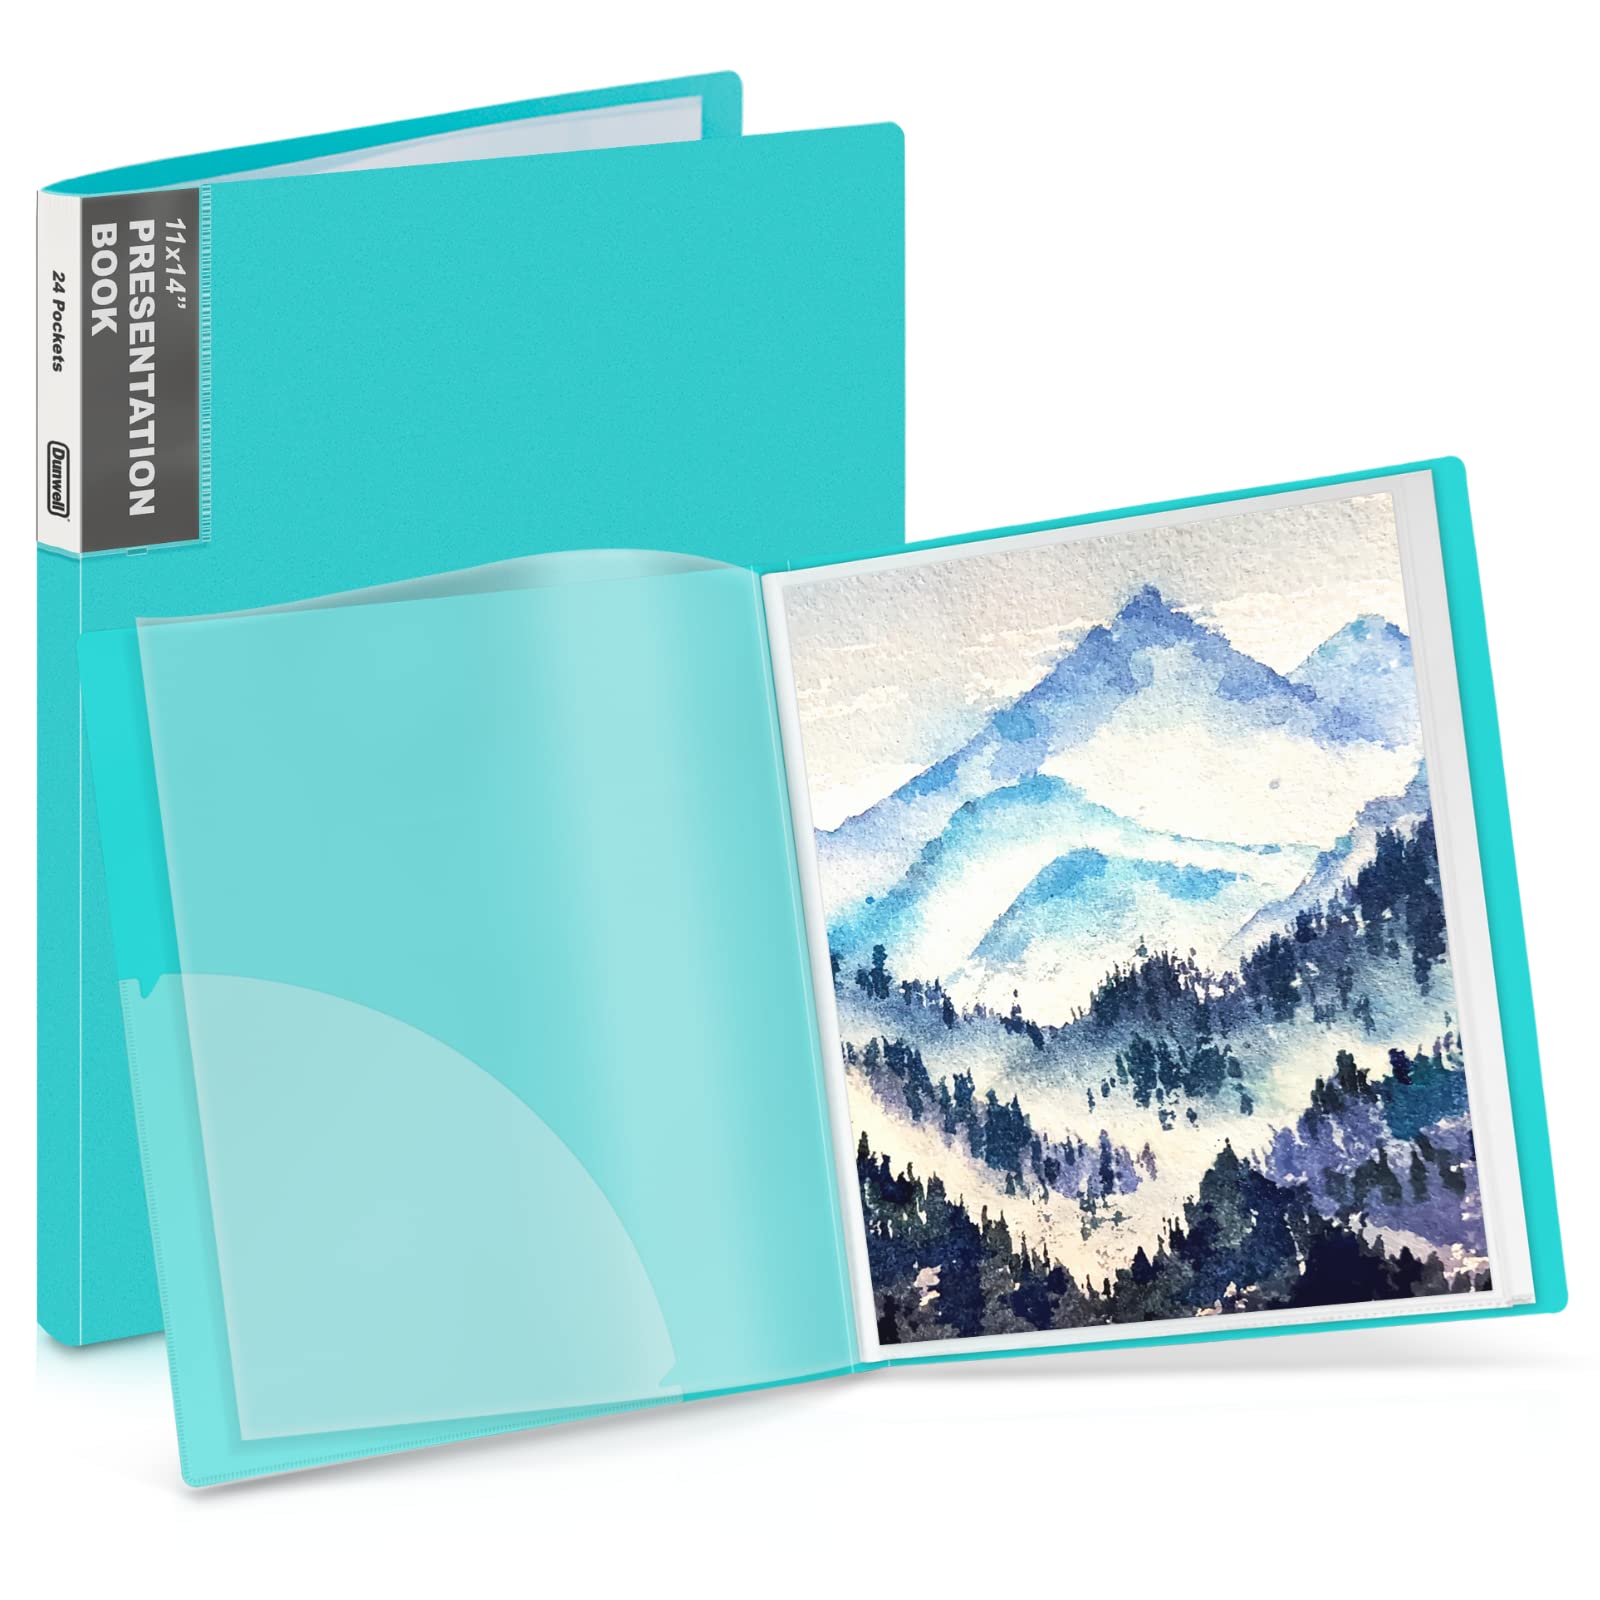 Dunwell 12x12 Binder with Sleeves - Folder with Clear Sheet Protectors,  24-Pockets, Display 48 Pages, 12 x 12 Presentation Book, Art Portfolio for